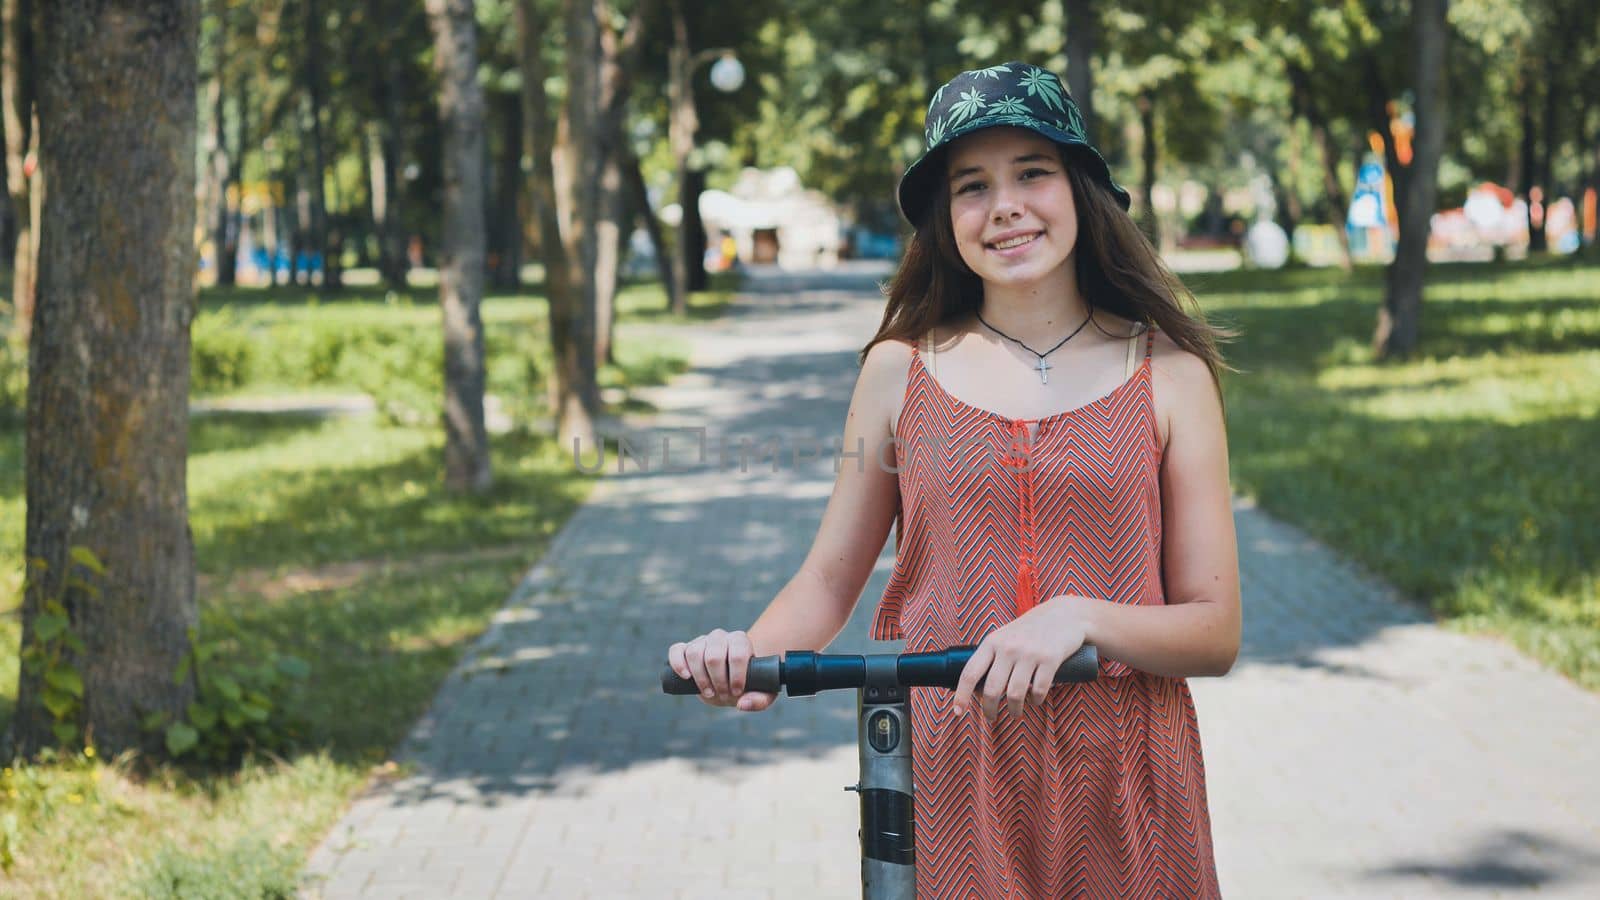 Portrait of a girl on an electric scooter posing in a park in the summer